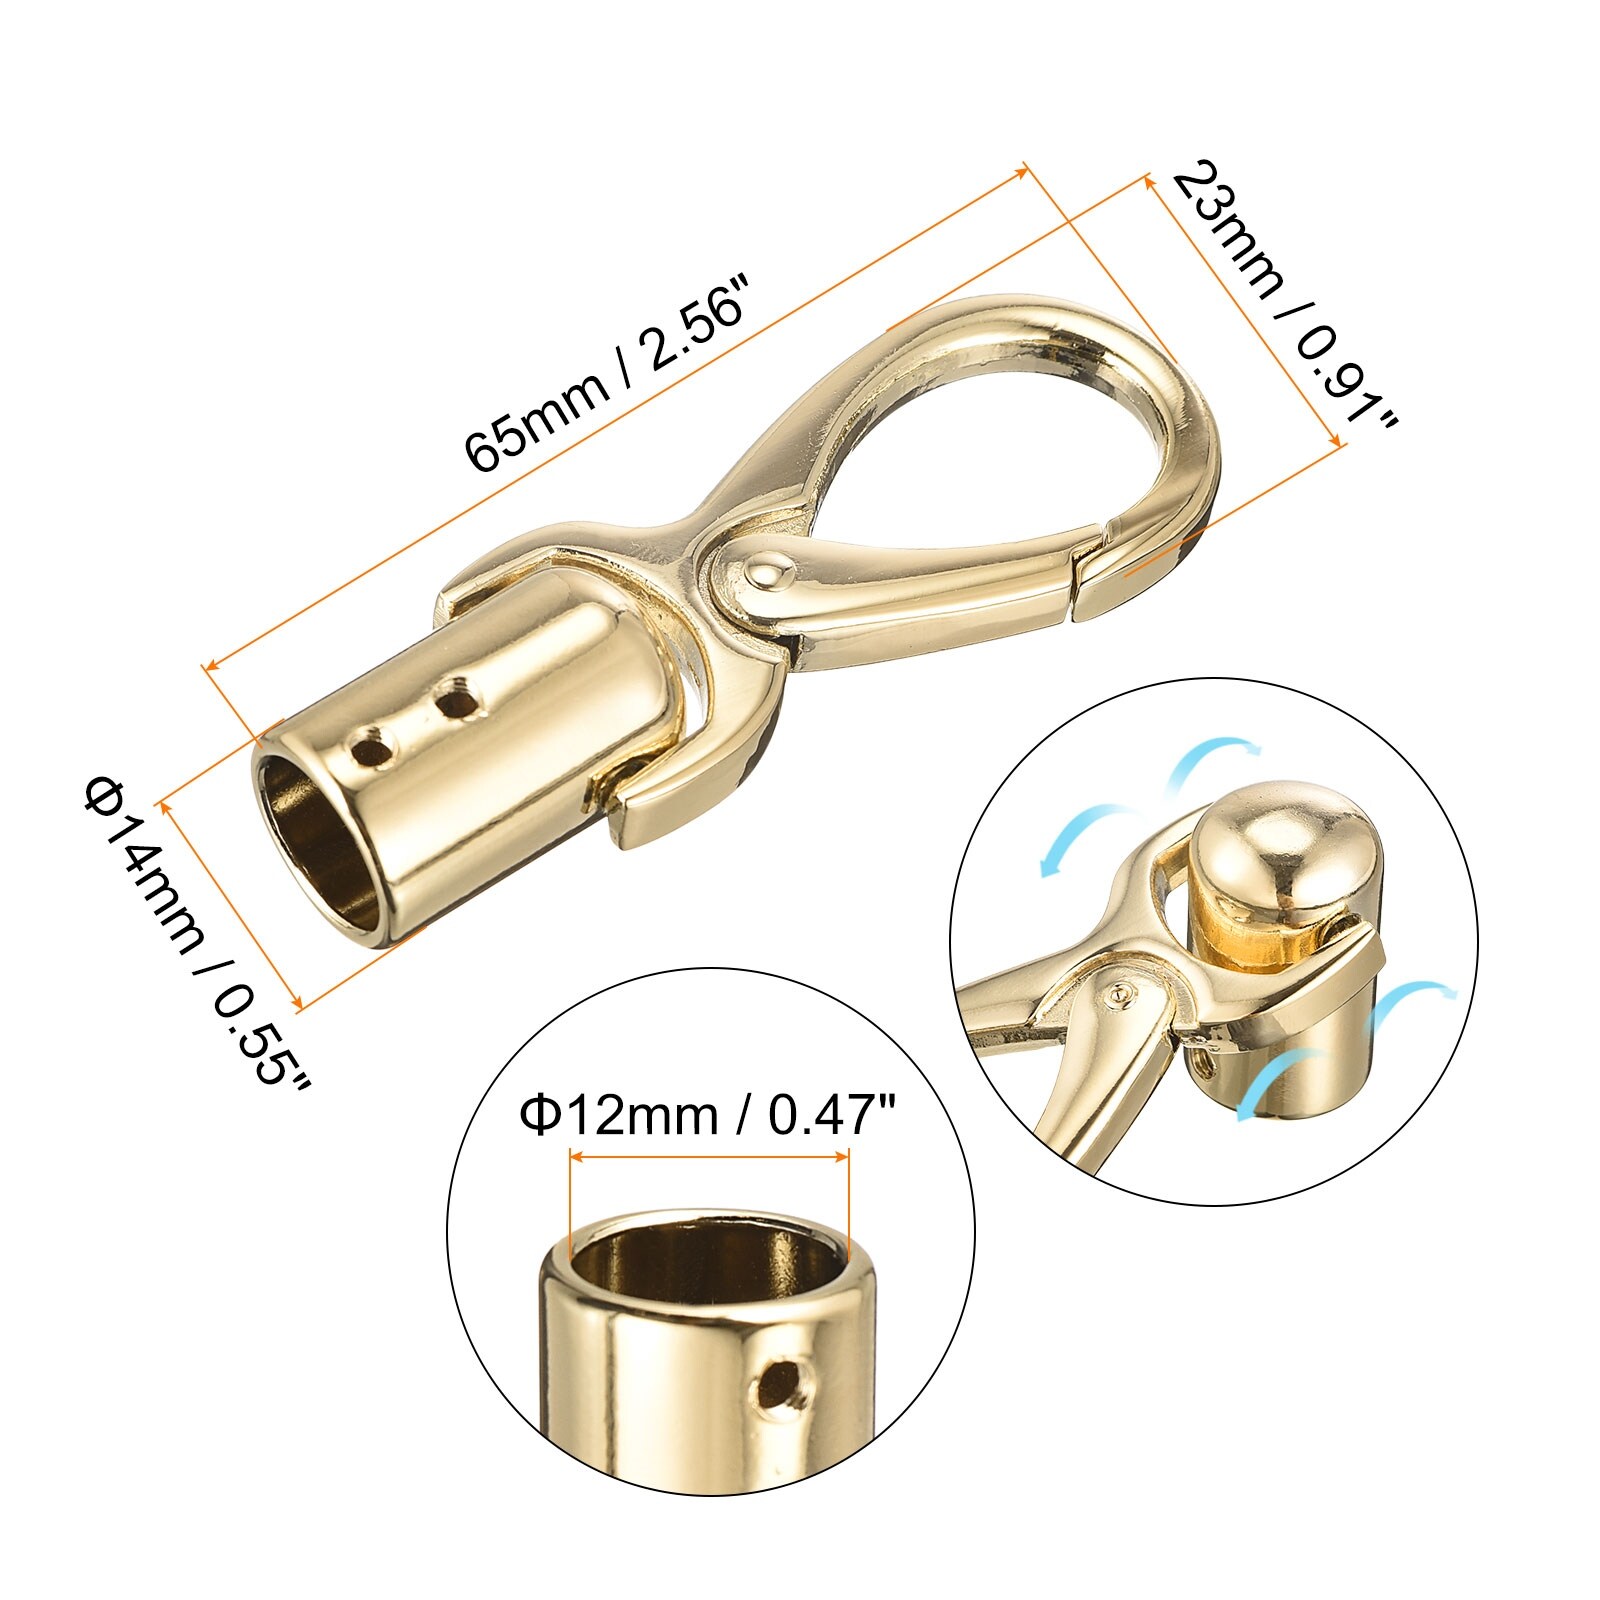 0.55 Cord End Cap Terminator Cord Finding for Jewelry Making, 4Pcs - Gold  Tone - Bed Bath & Beyond - 36885883